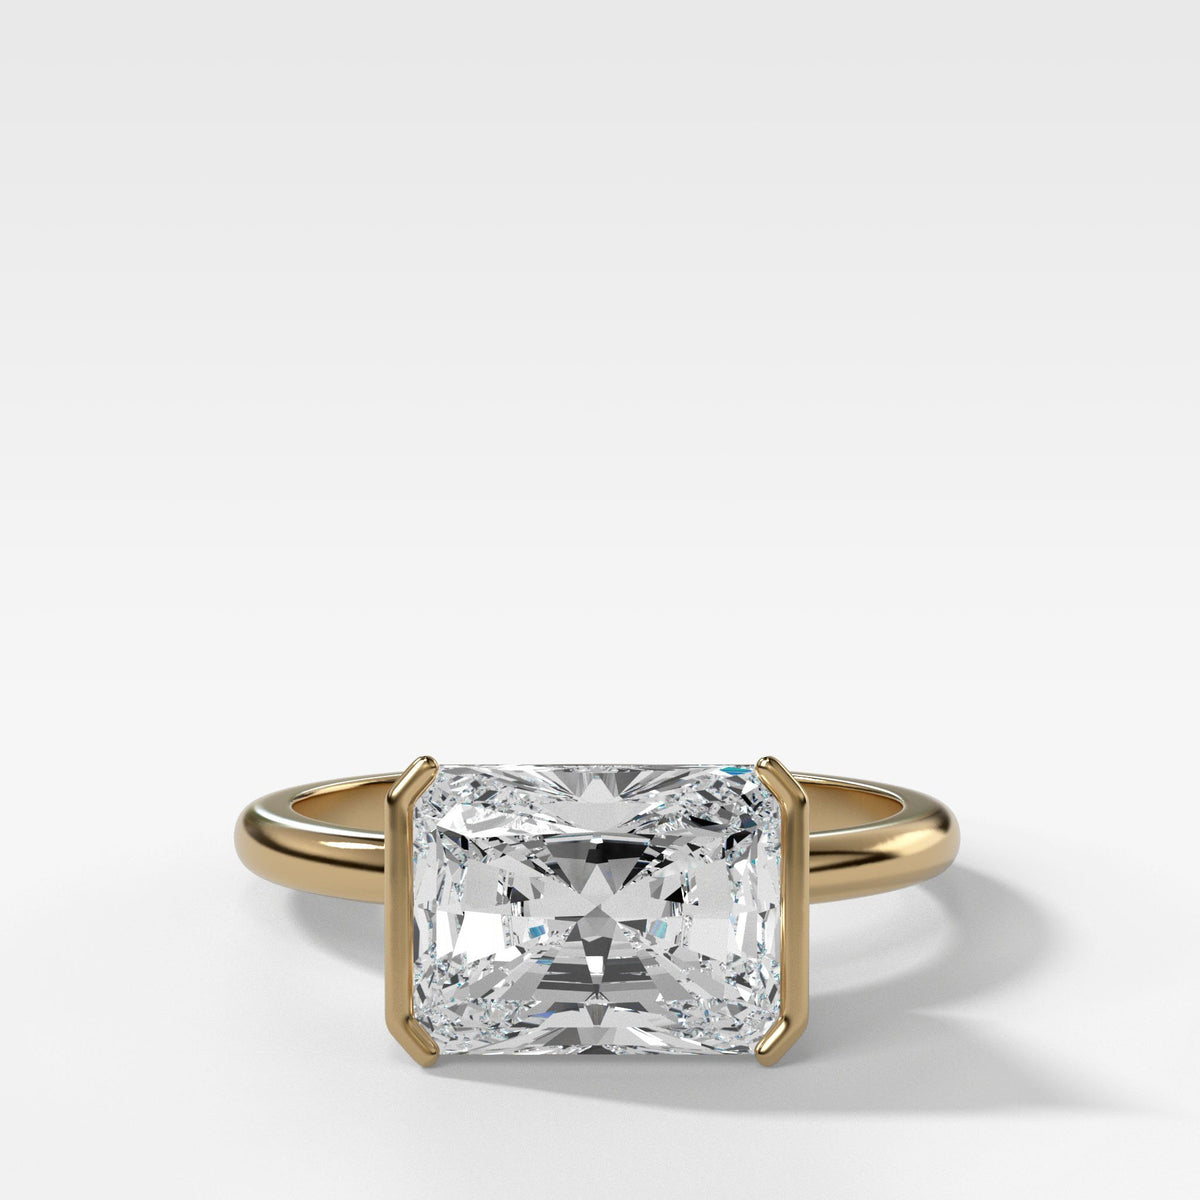 Half Bezel Solitaire Engagement ring with Elongated Radiant Cut by Good Stone in Yellow Gold